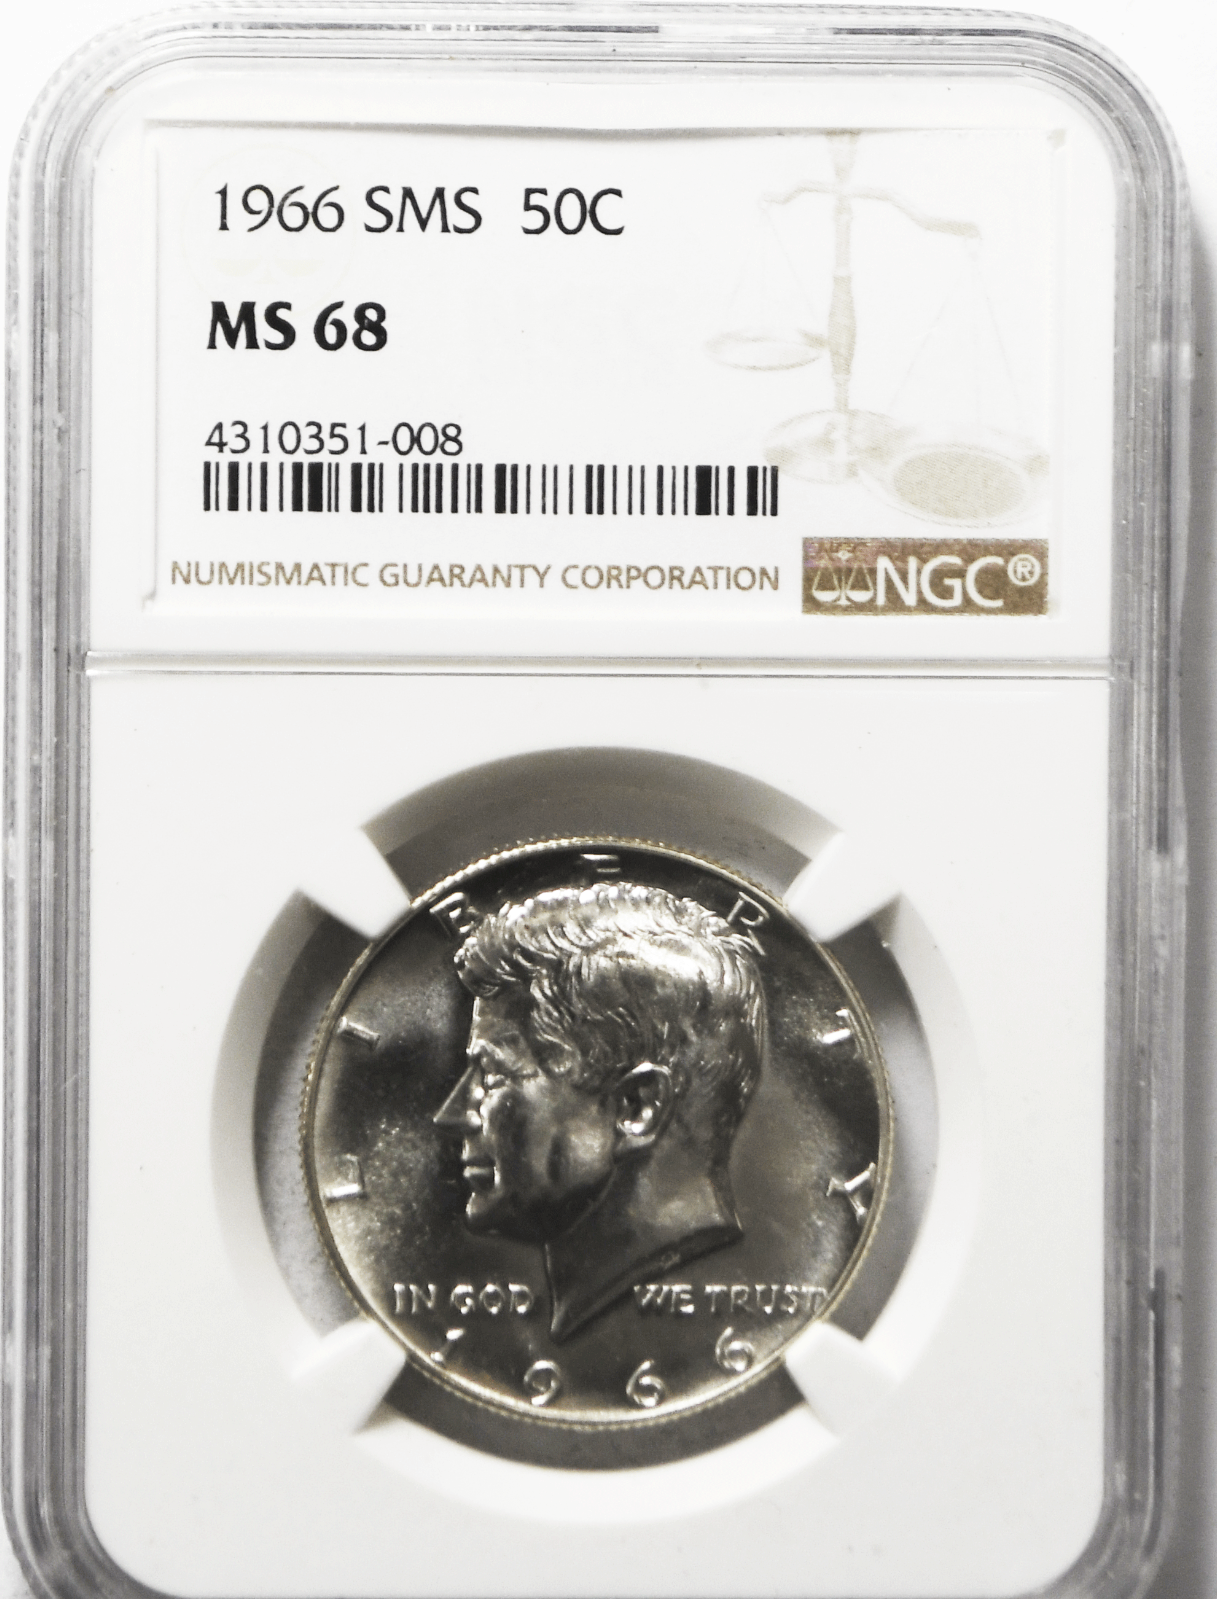 1966 50c SMS Kennedy Silver Half Dollar Fifty Cents MS68 NGC